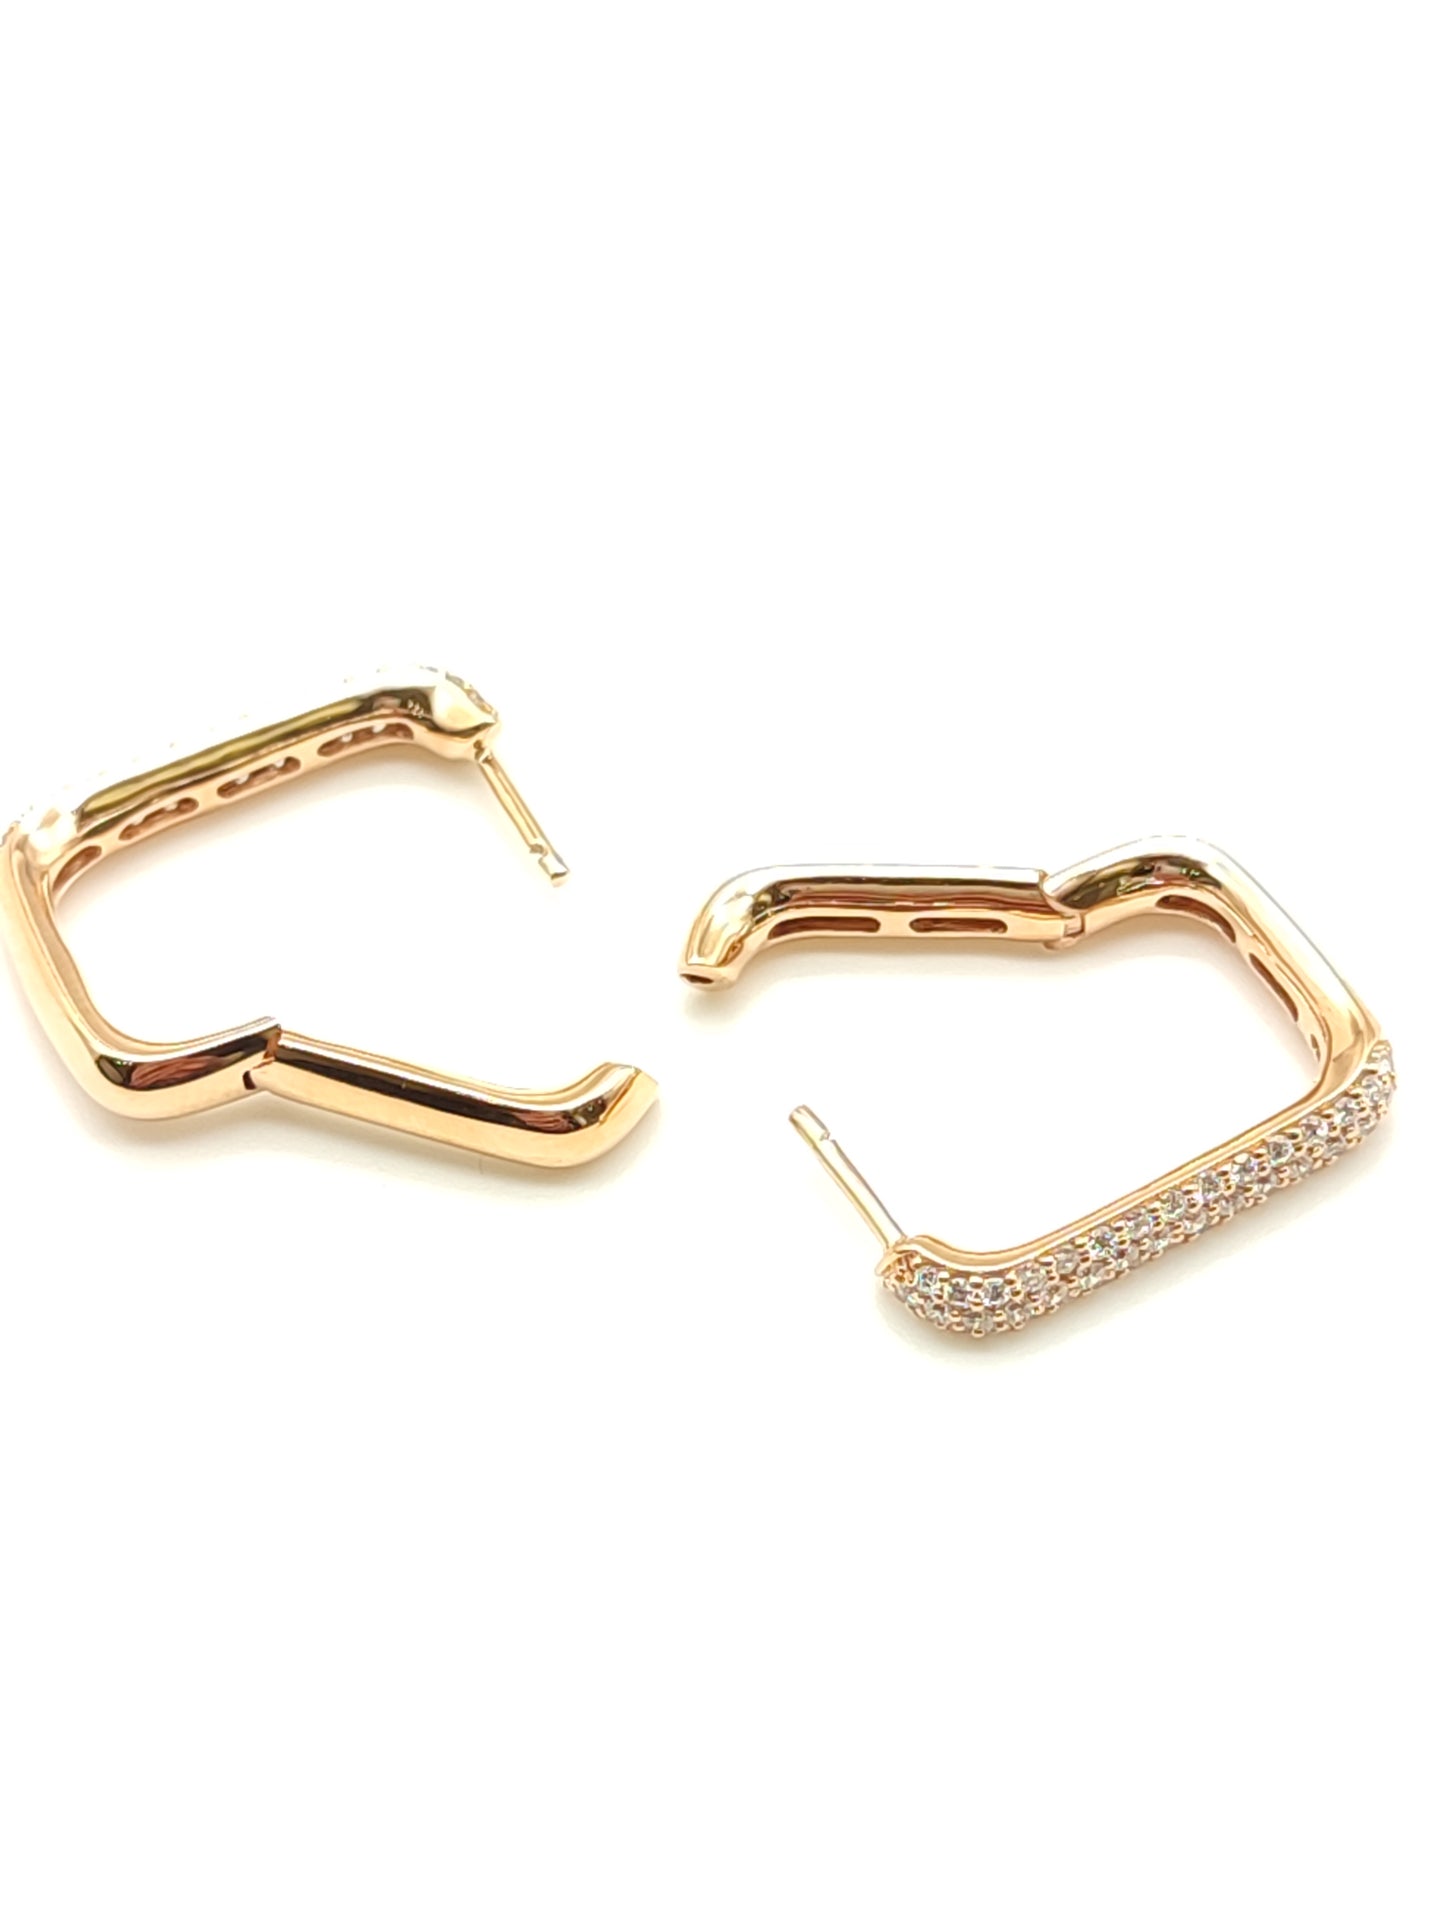 Rectangular earrings in rose gold with diamonds